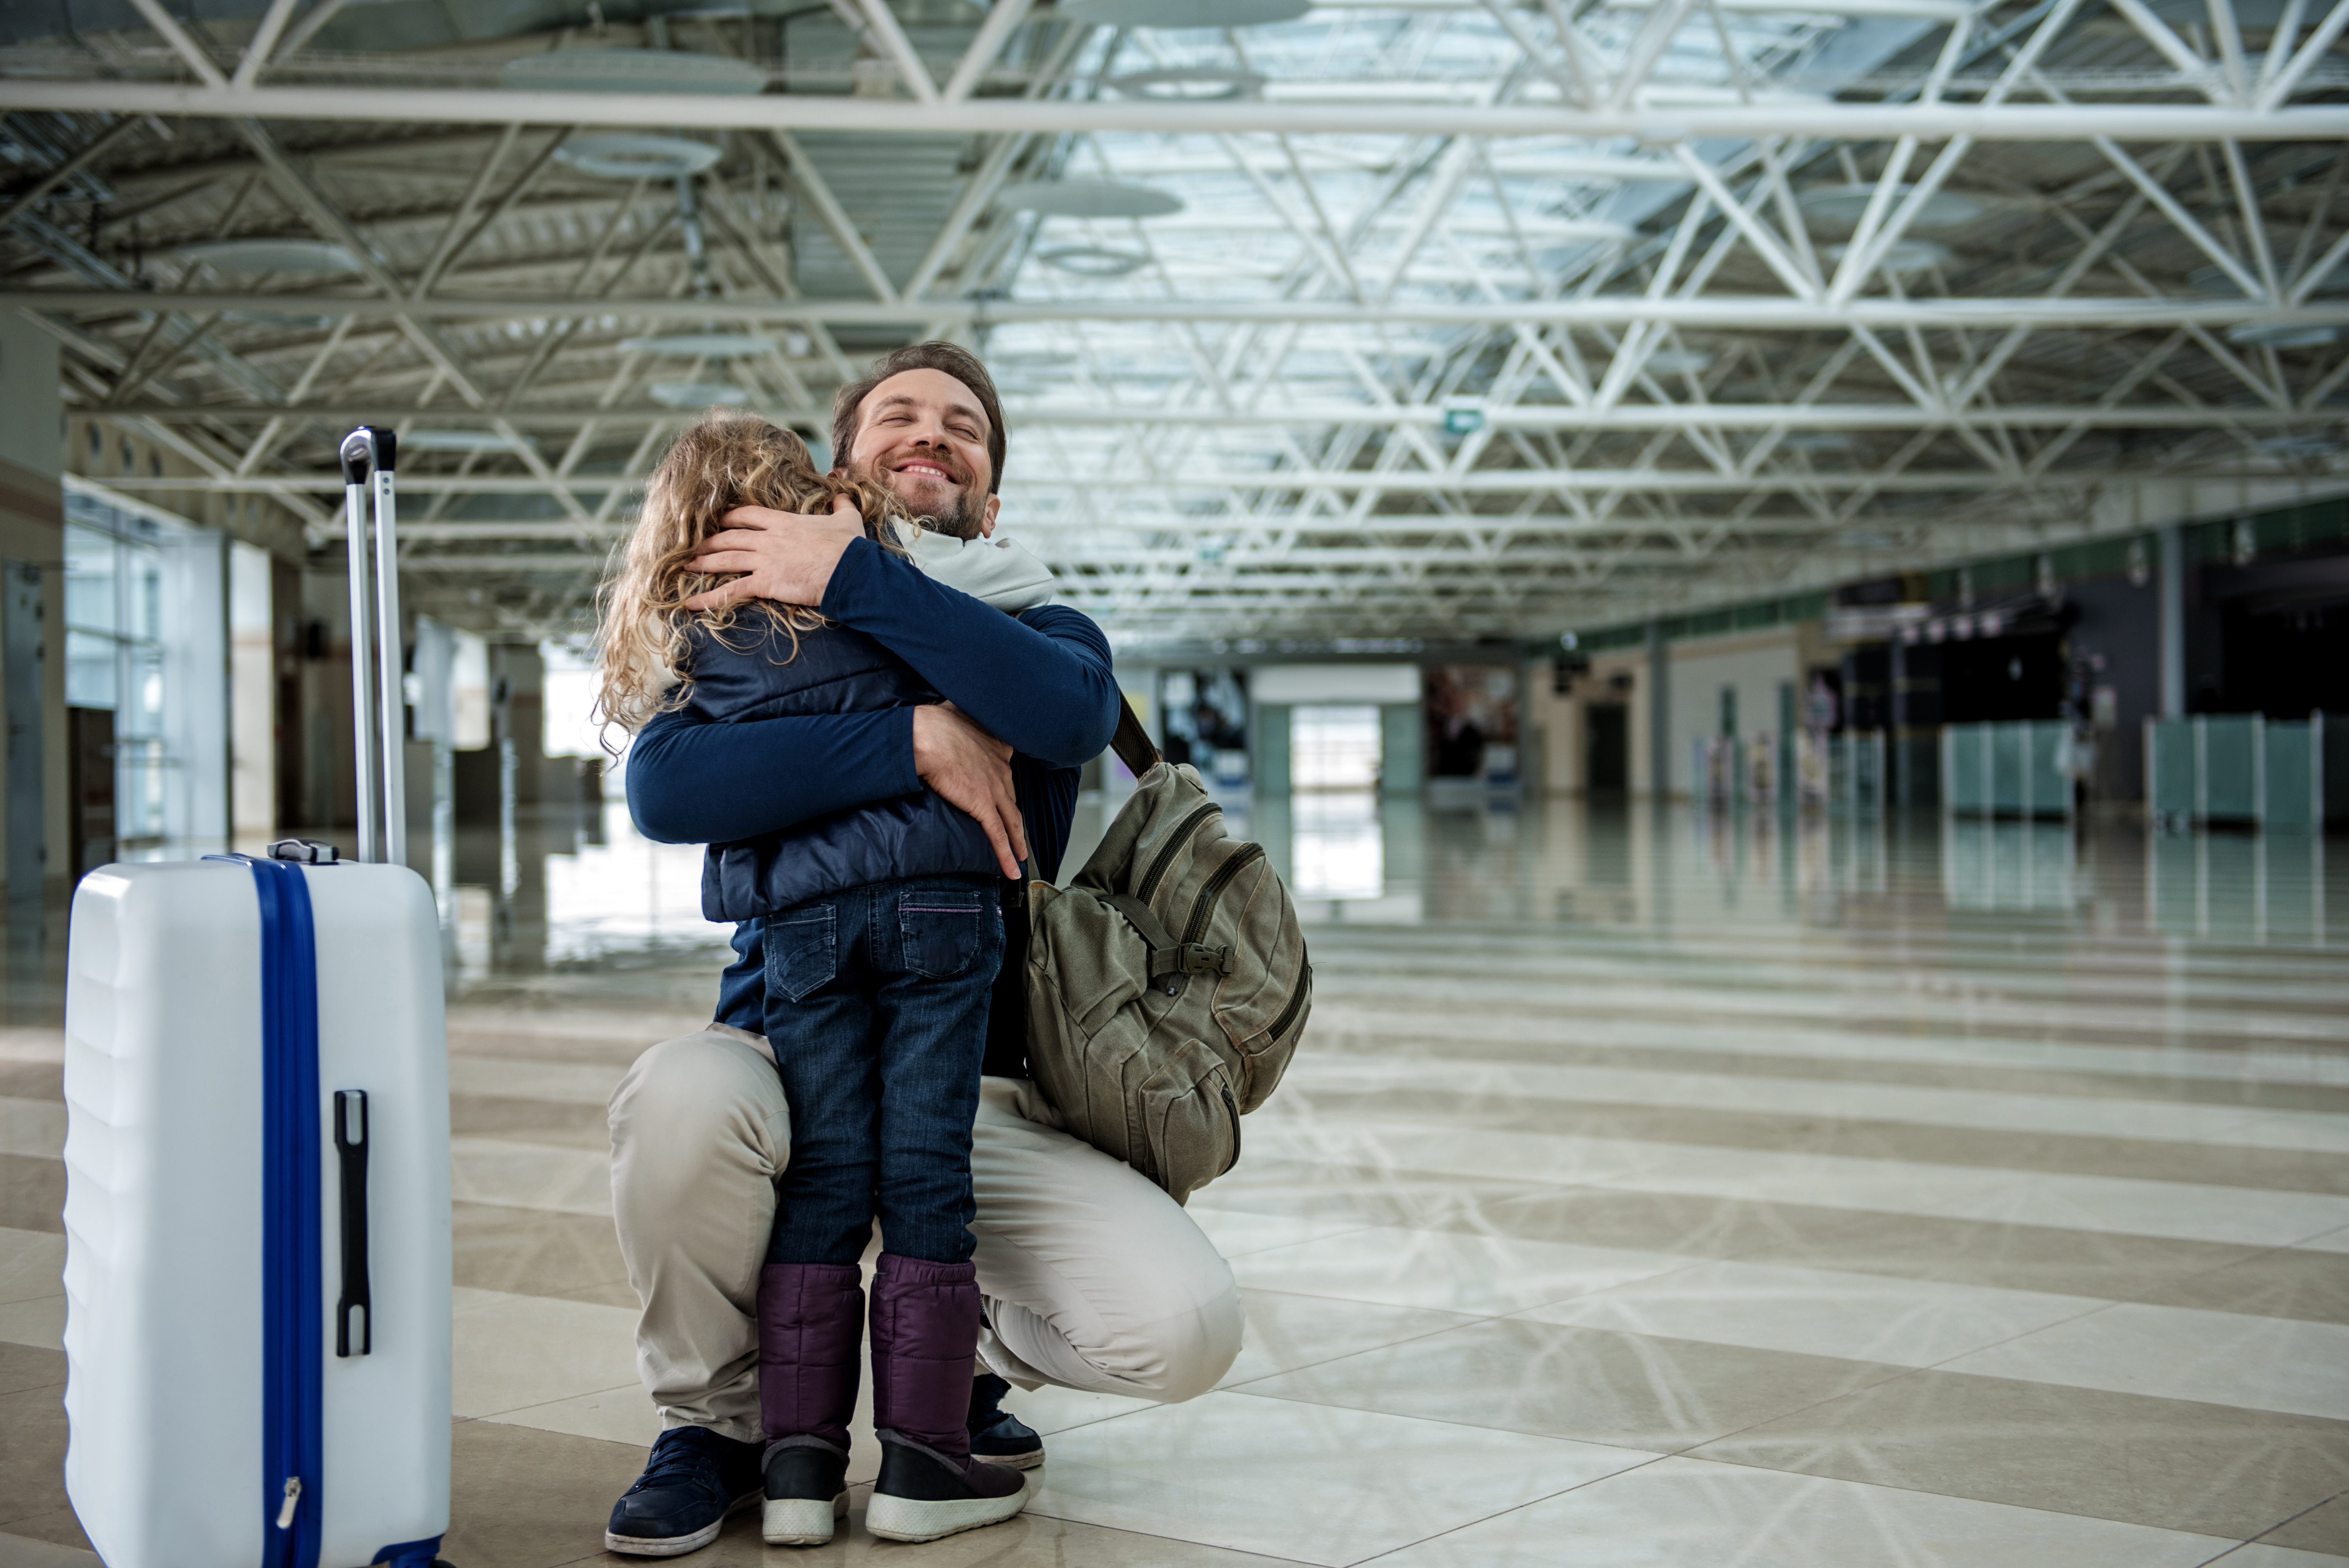 Daddy is embracing girl in the airport hall with happiness. Copy space in right side